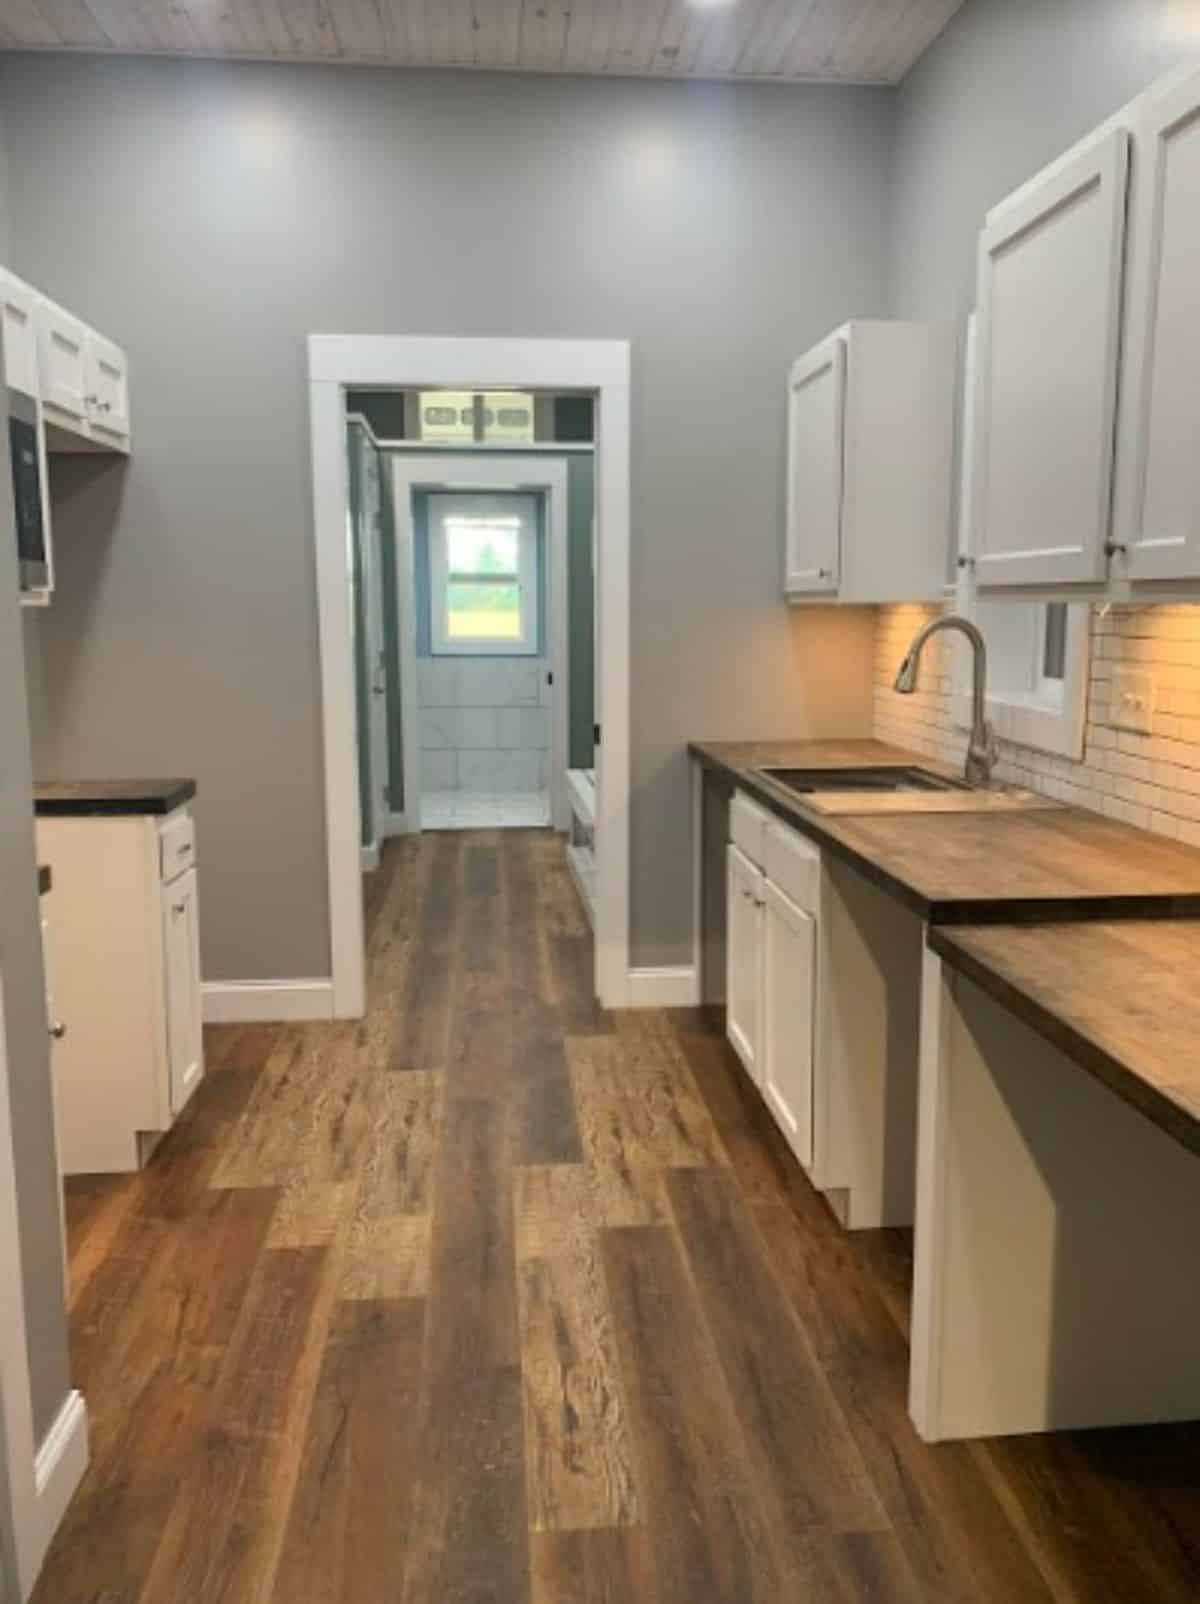 Double galley kitchen area of Airbnb Tiny Home